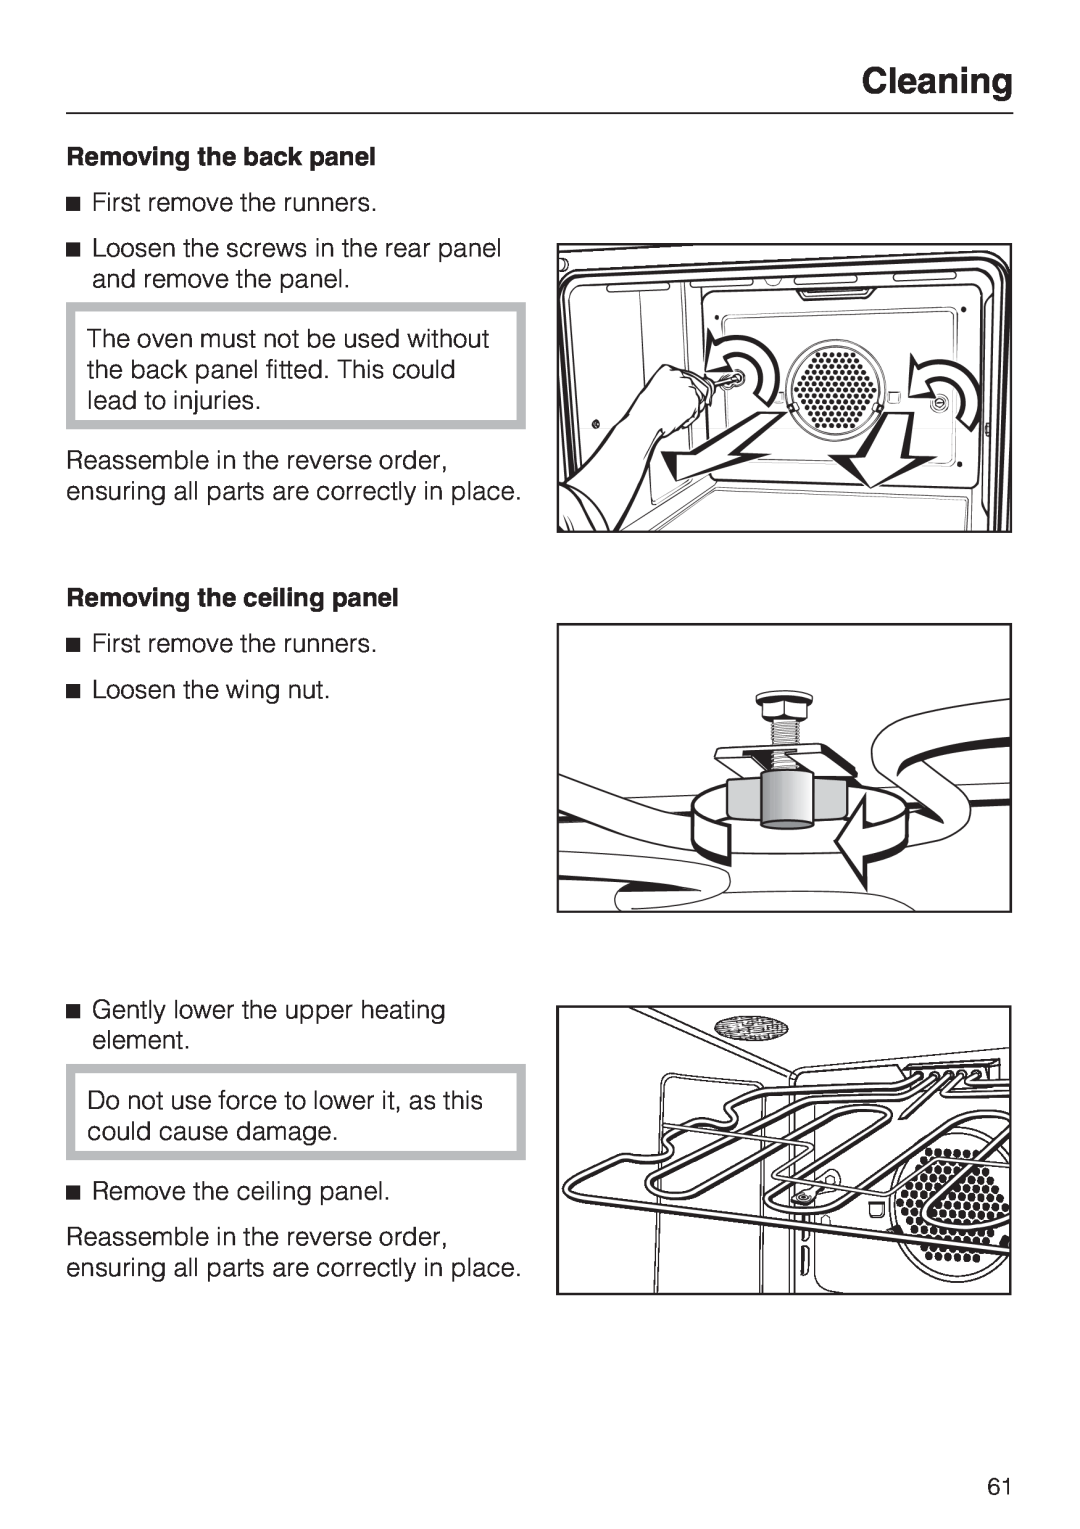 Miele H 4688 B, H4682B installation instructions Cleaning, Removing the back panel, Removing the ceiling panel 